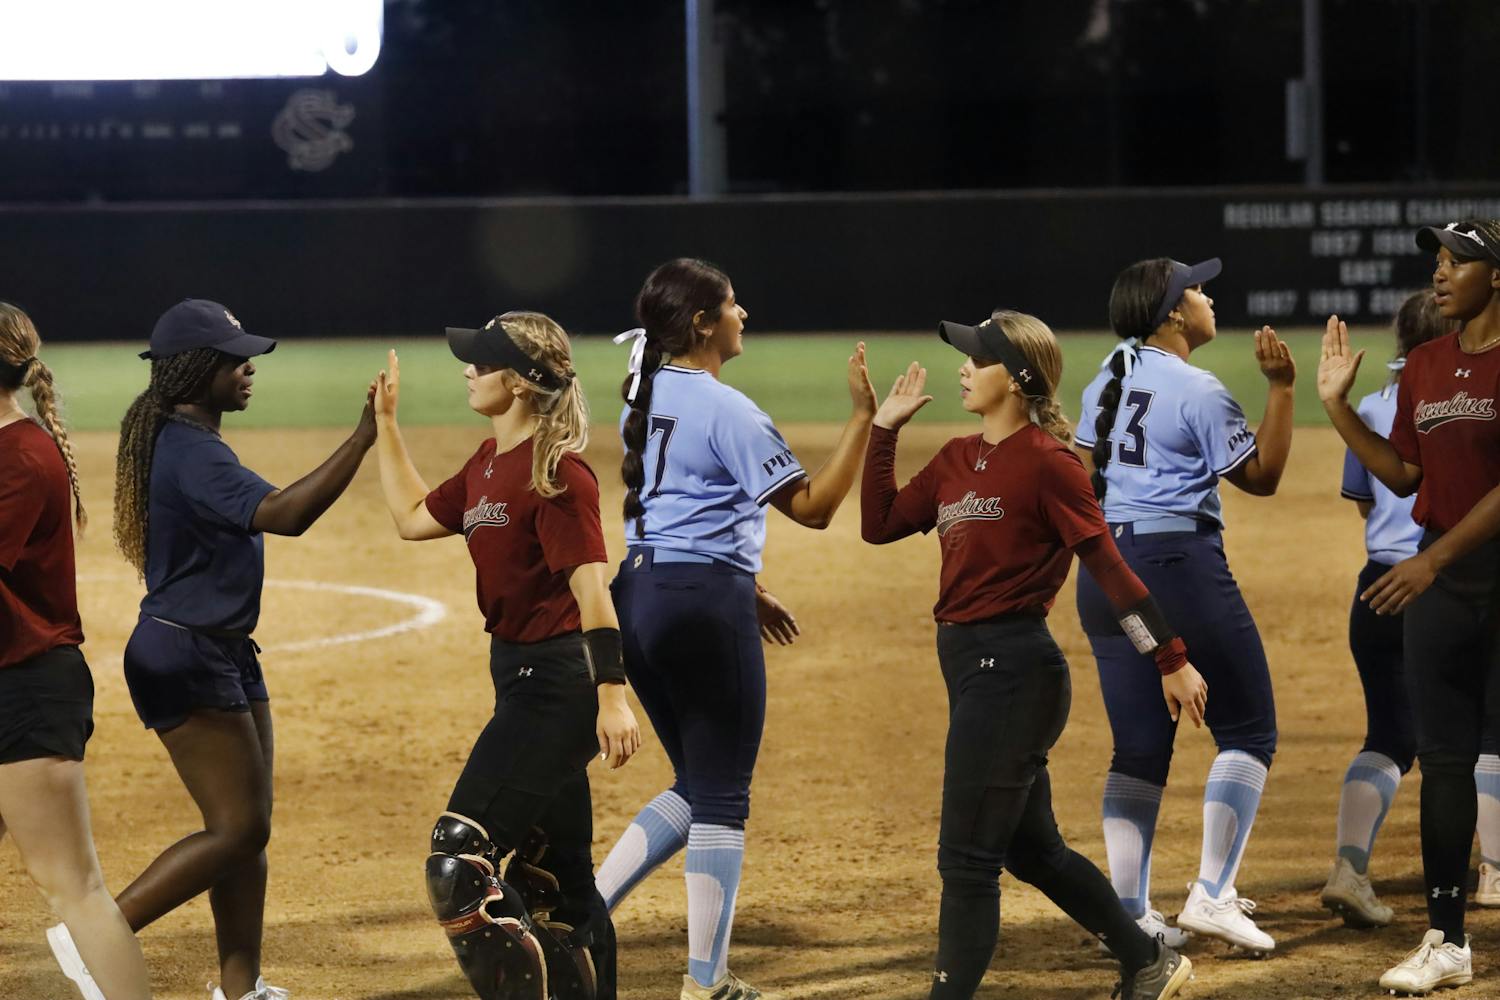 The Gamecock softball team high-fives members of USC Beaufort's team after the two squared off in an exhibition at Beckham Field on Oct. 7, 2023. The 3-0 win over USC Beaufort was South Carolina's second of the day following a 14-0 win over Wofford.